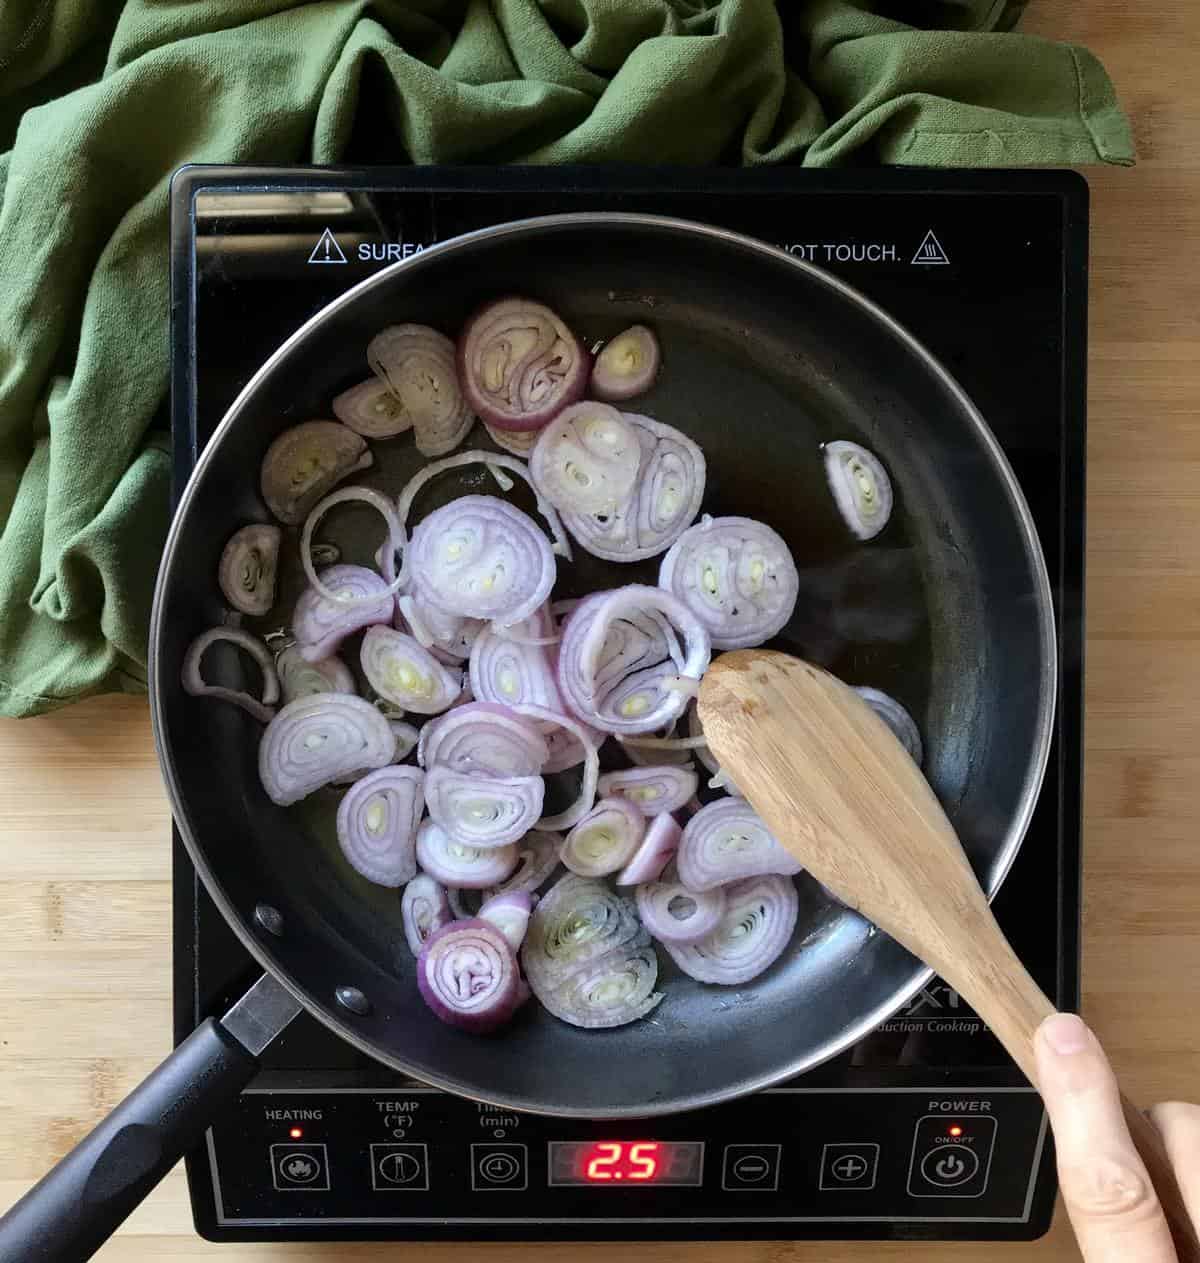 Shallots are in the process of being sauteed.